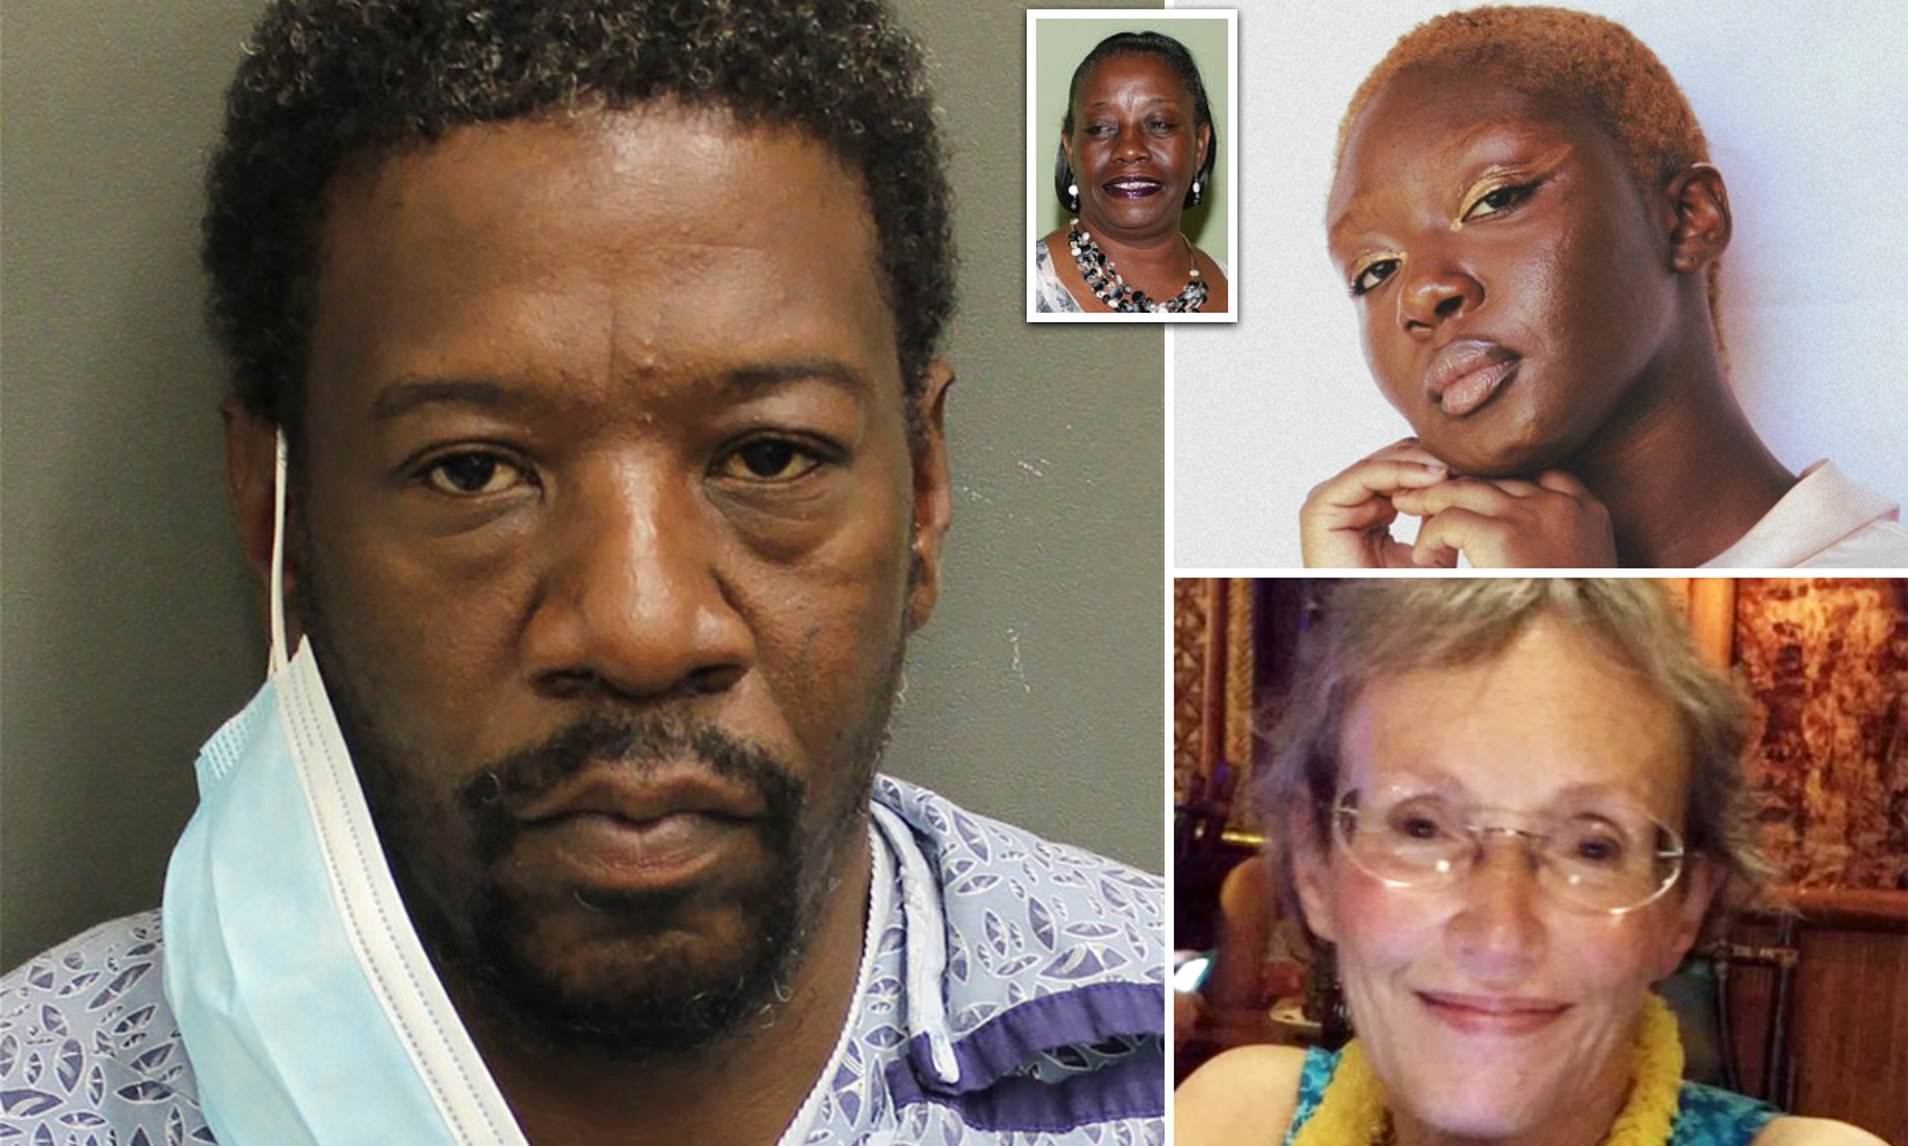 Florida Man Pleads Guilty to Kidnapping and Murder of Black Lives Matter Activist and Retired State Worker, Sentenced to Life in Prison